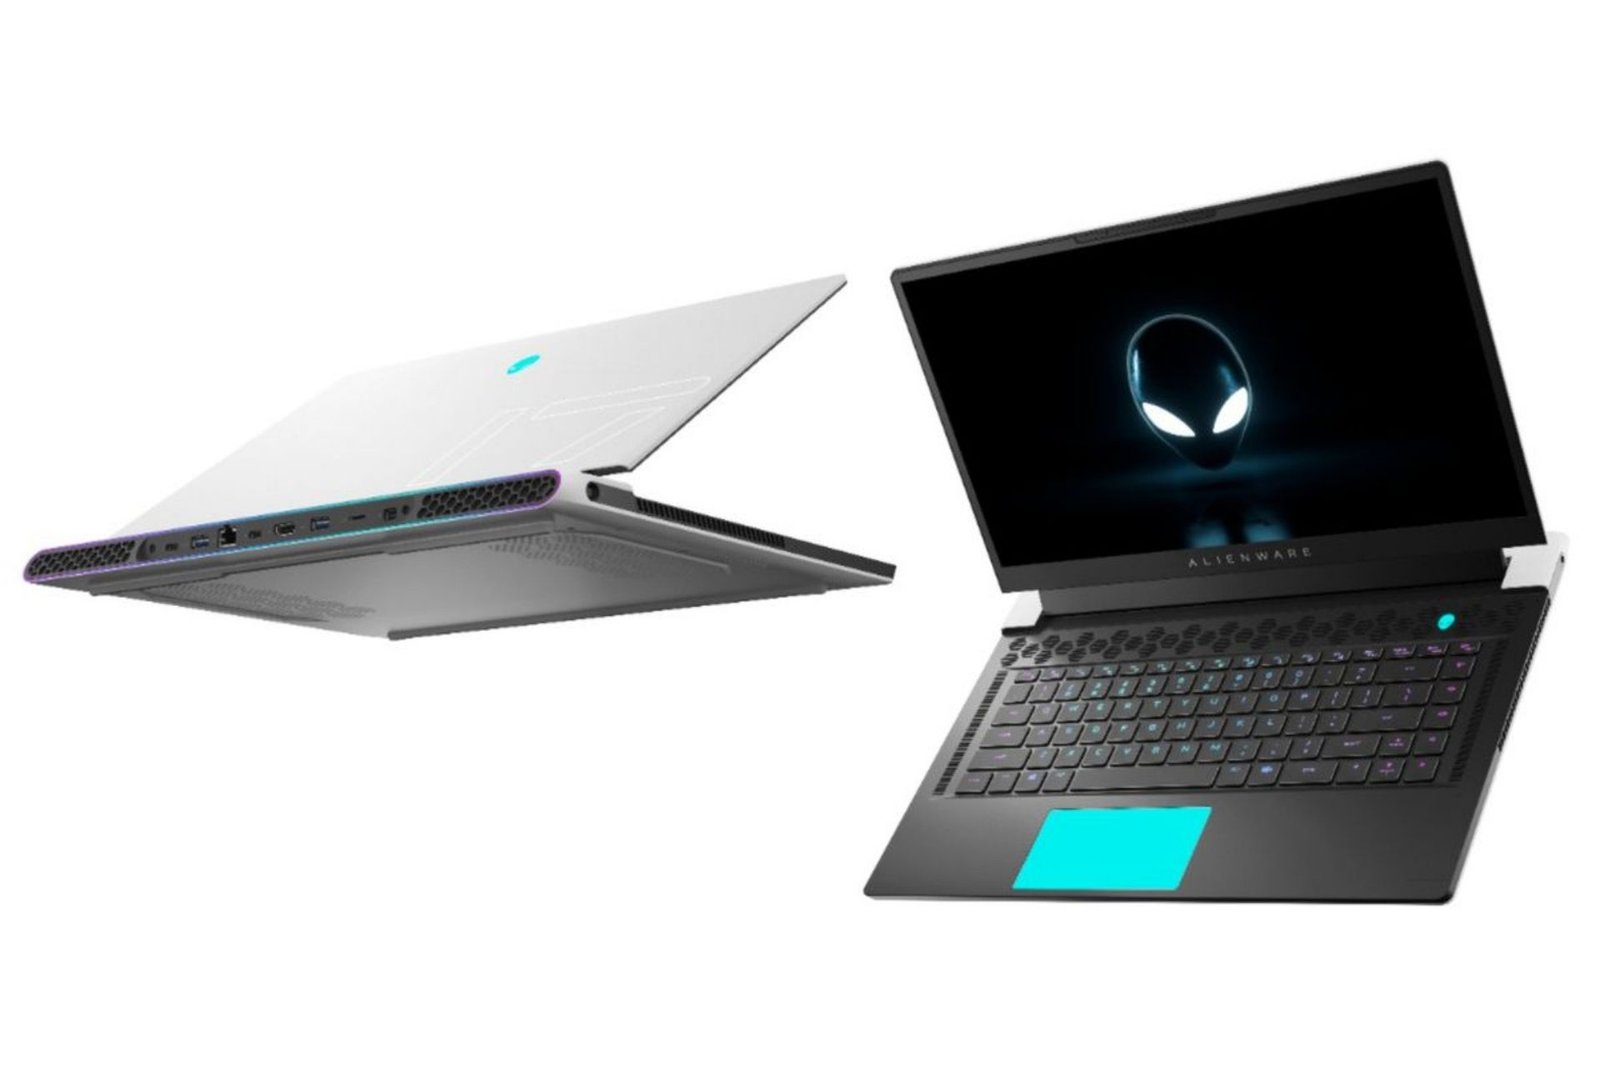 The Alienware X15 is the best and coolest Alienware gaming laptop to date.